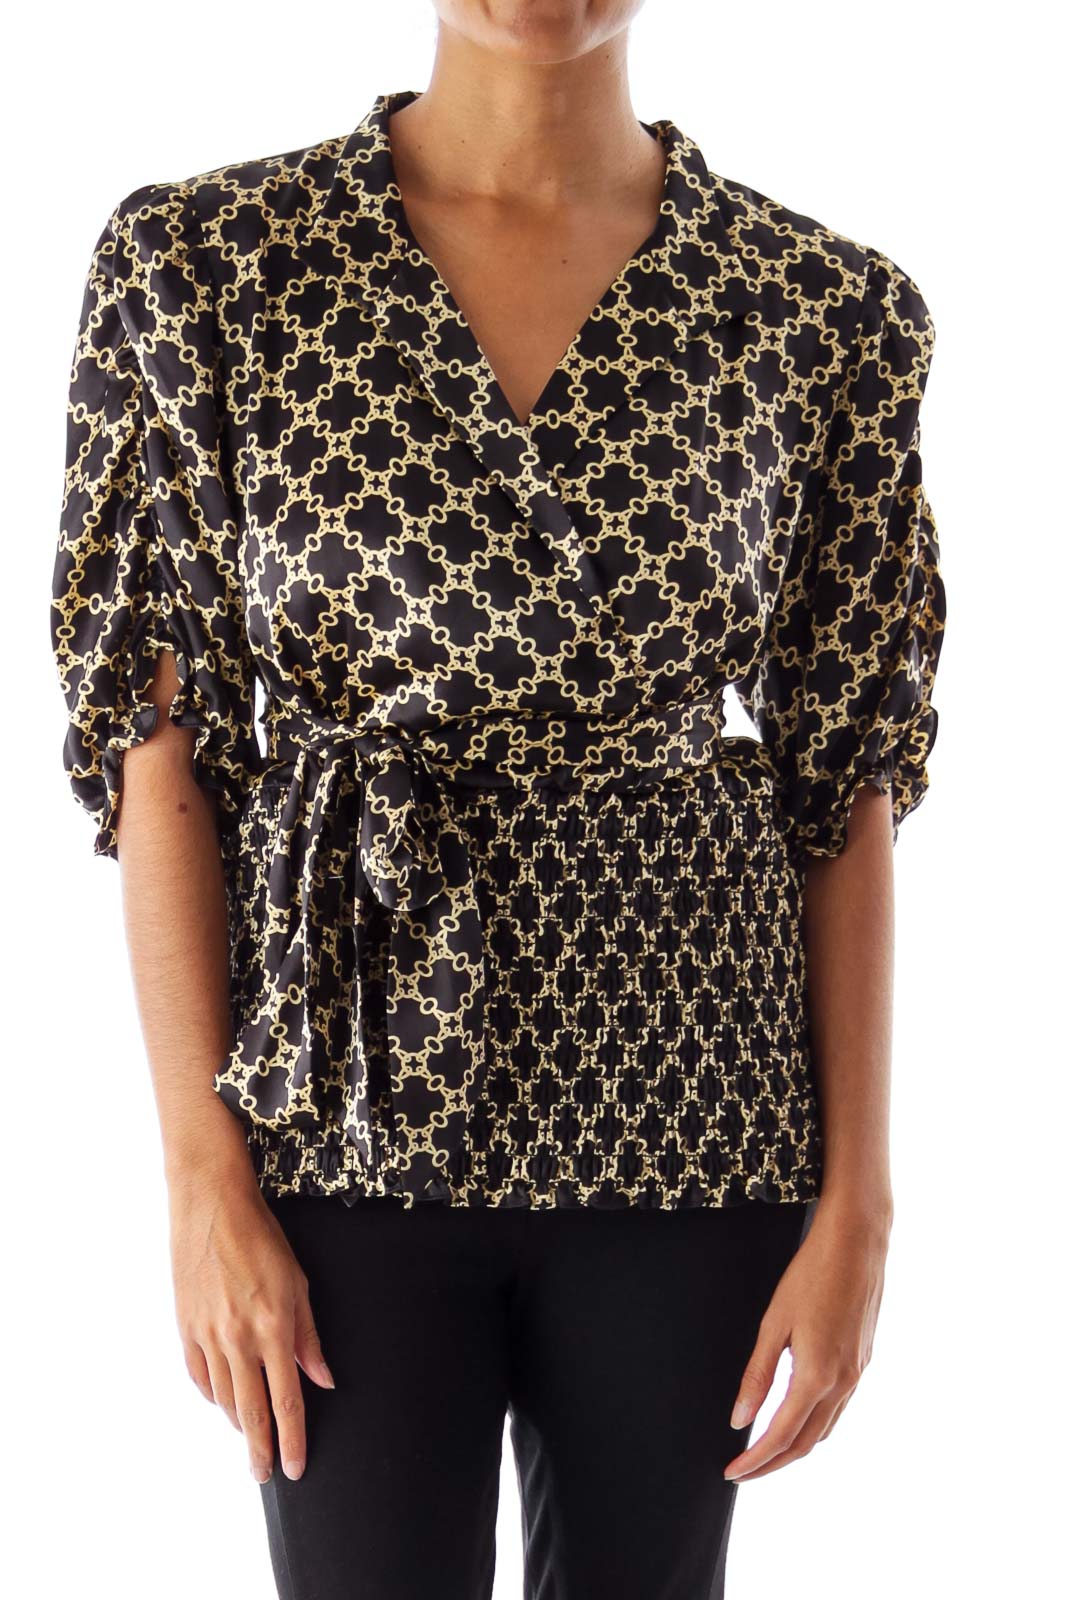 Black & Gold Chain Print Top Front